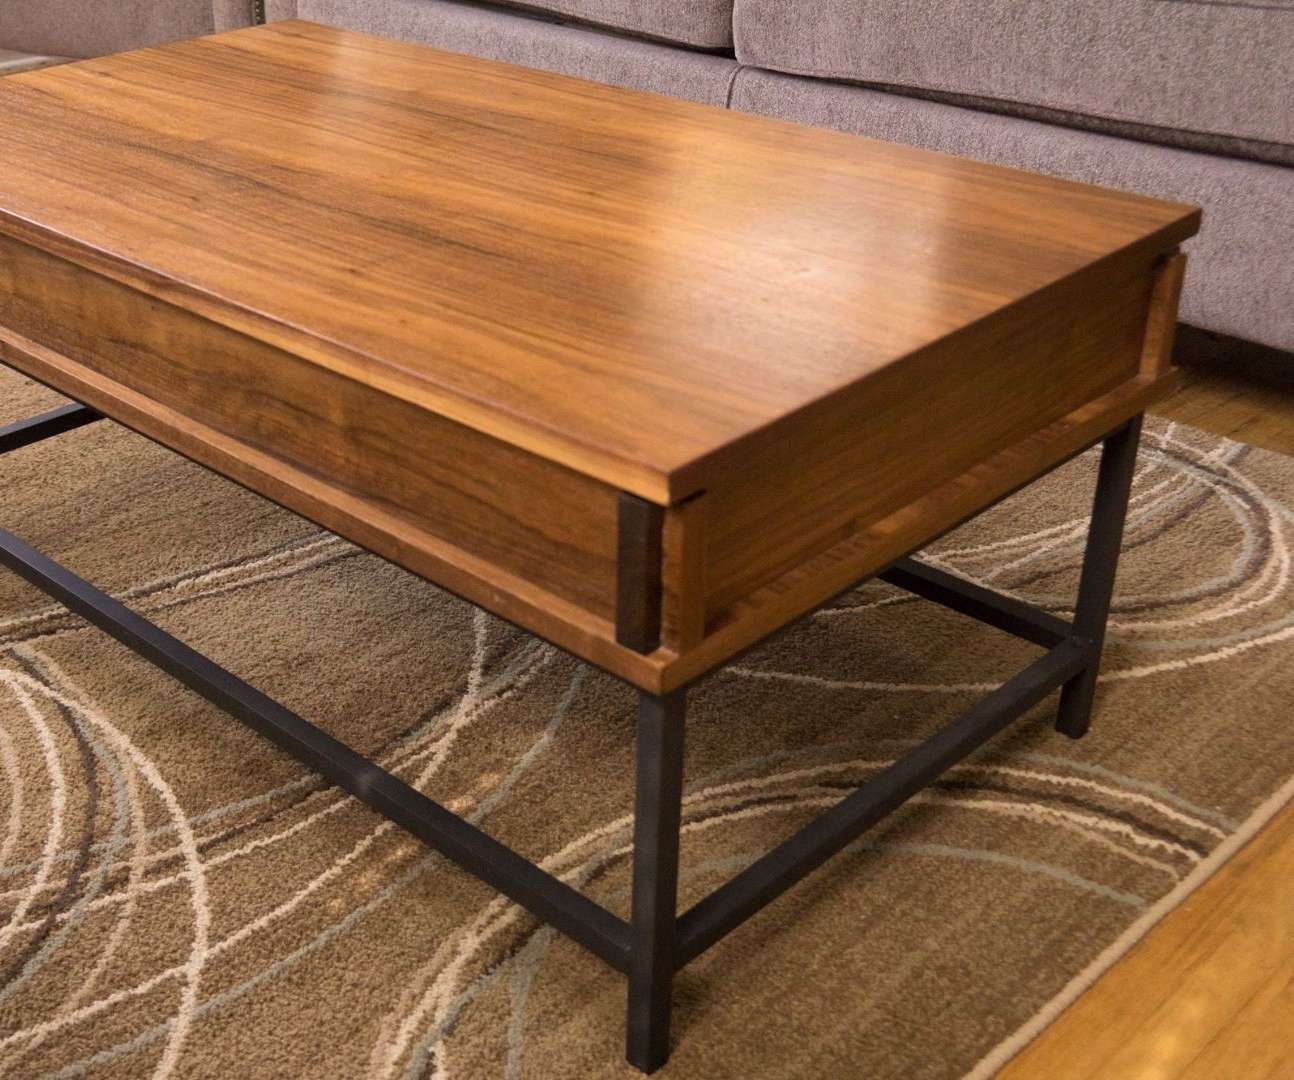 Well Known Coffee Tables Top Lifts Up With How To Make A Coffee Table With Lift Top: 18 Steps (with Pictures) (View 11 of 20)